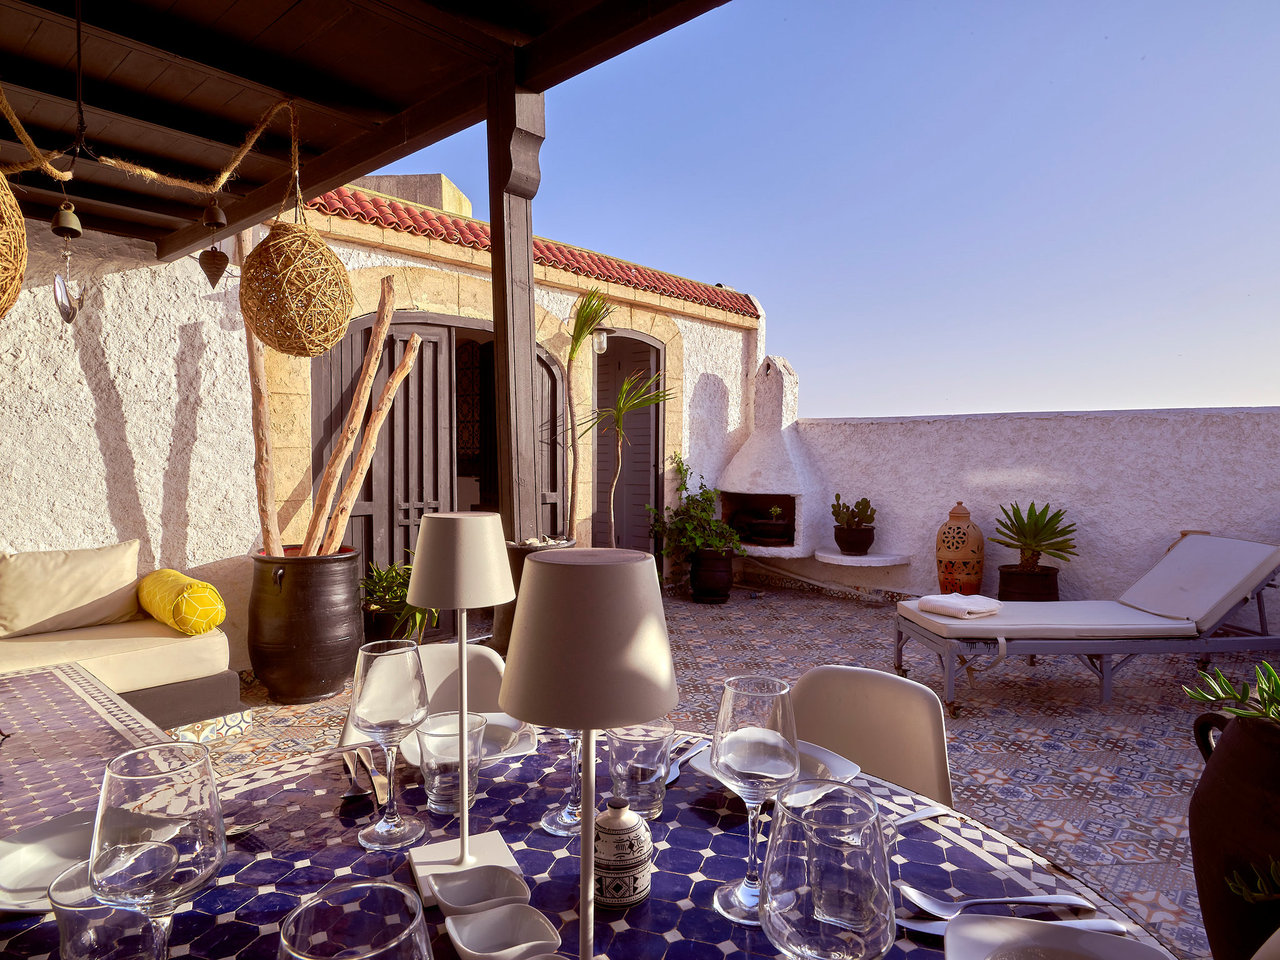 20-09-02-VM Wonderful house for sale in Essaouira 70 m² with private terrace